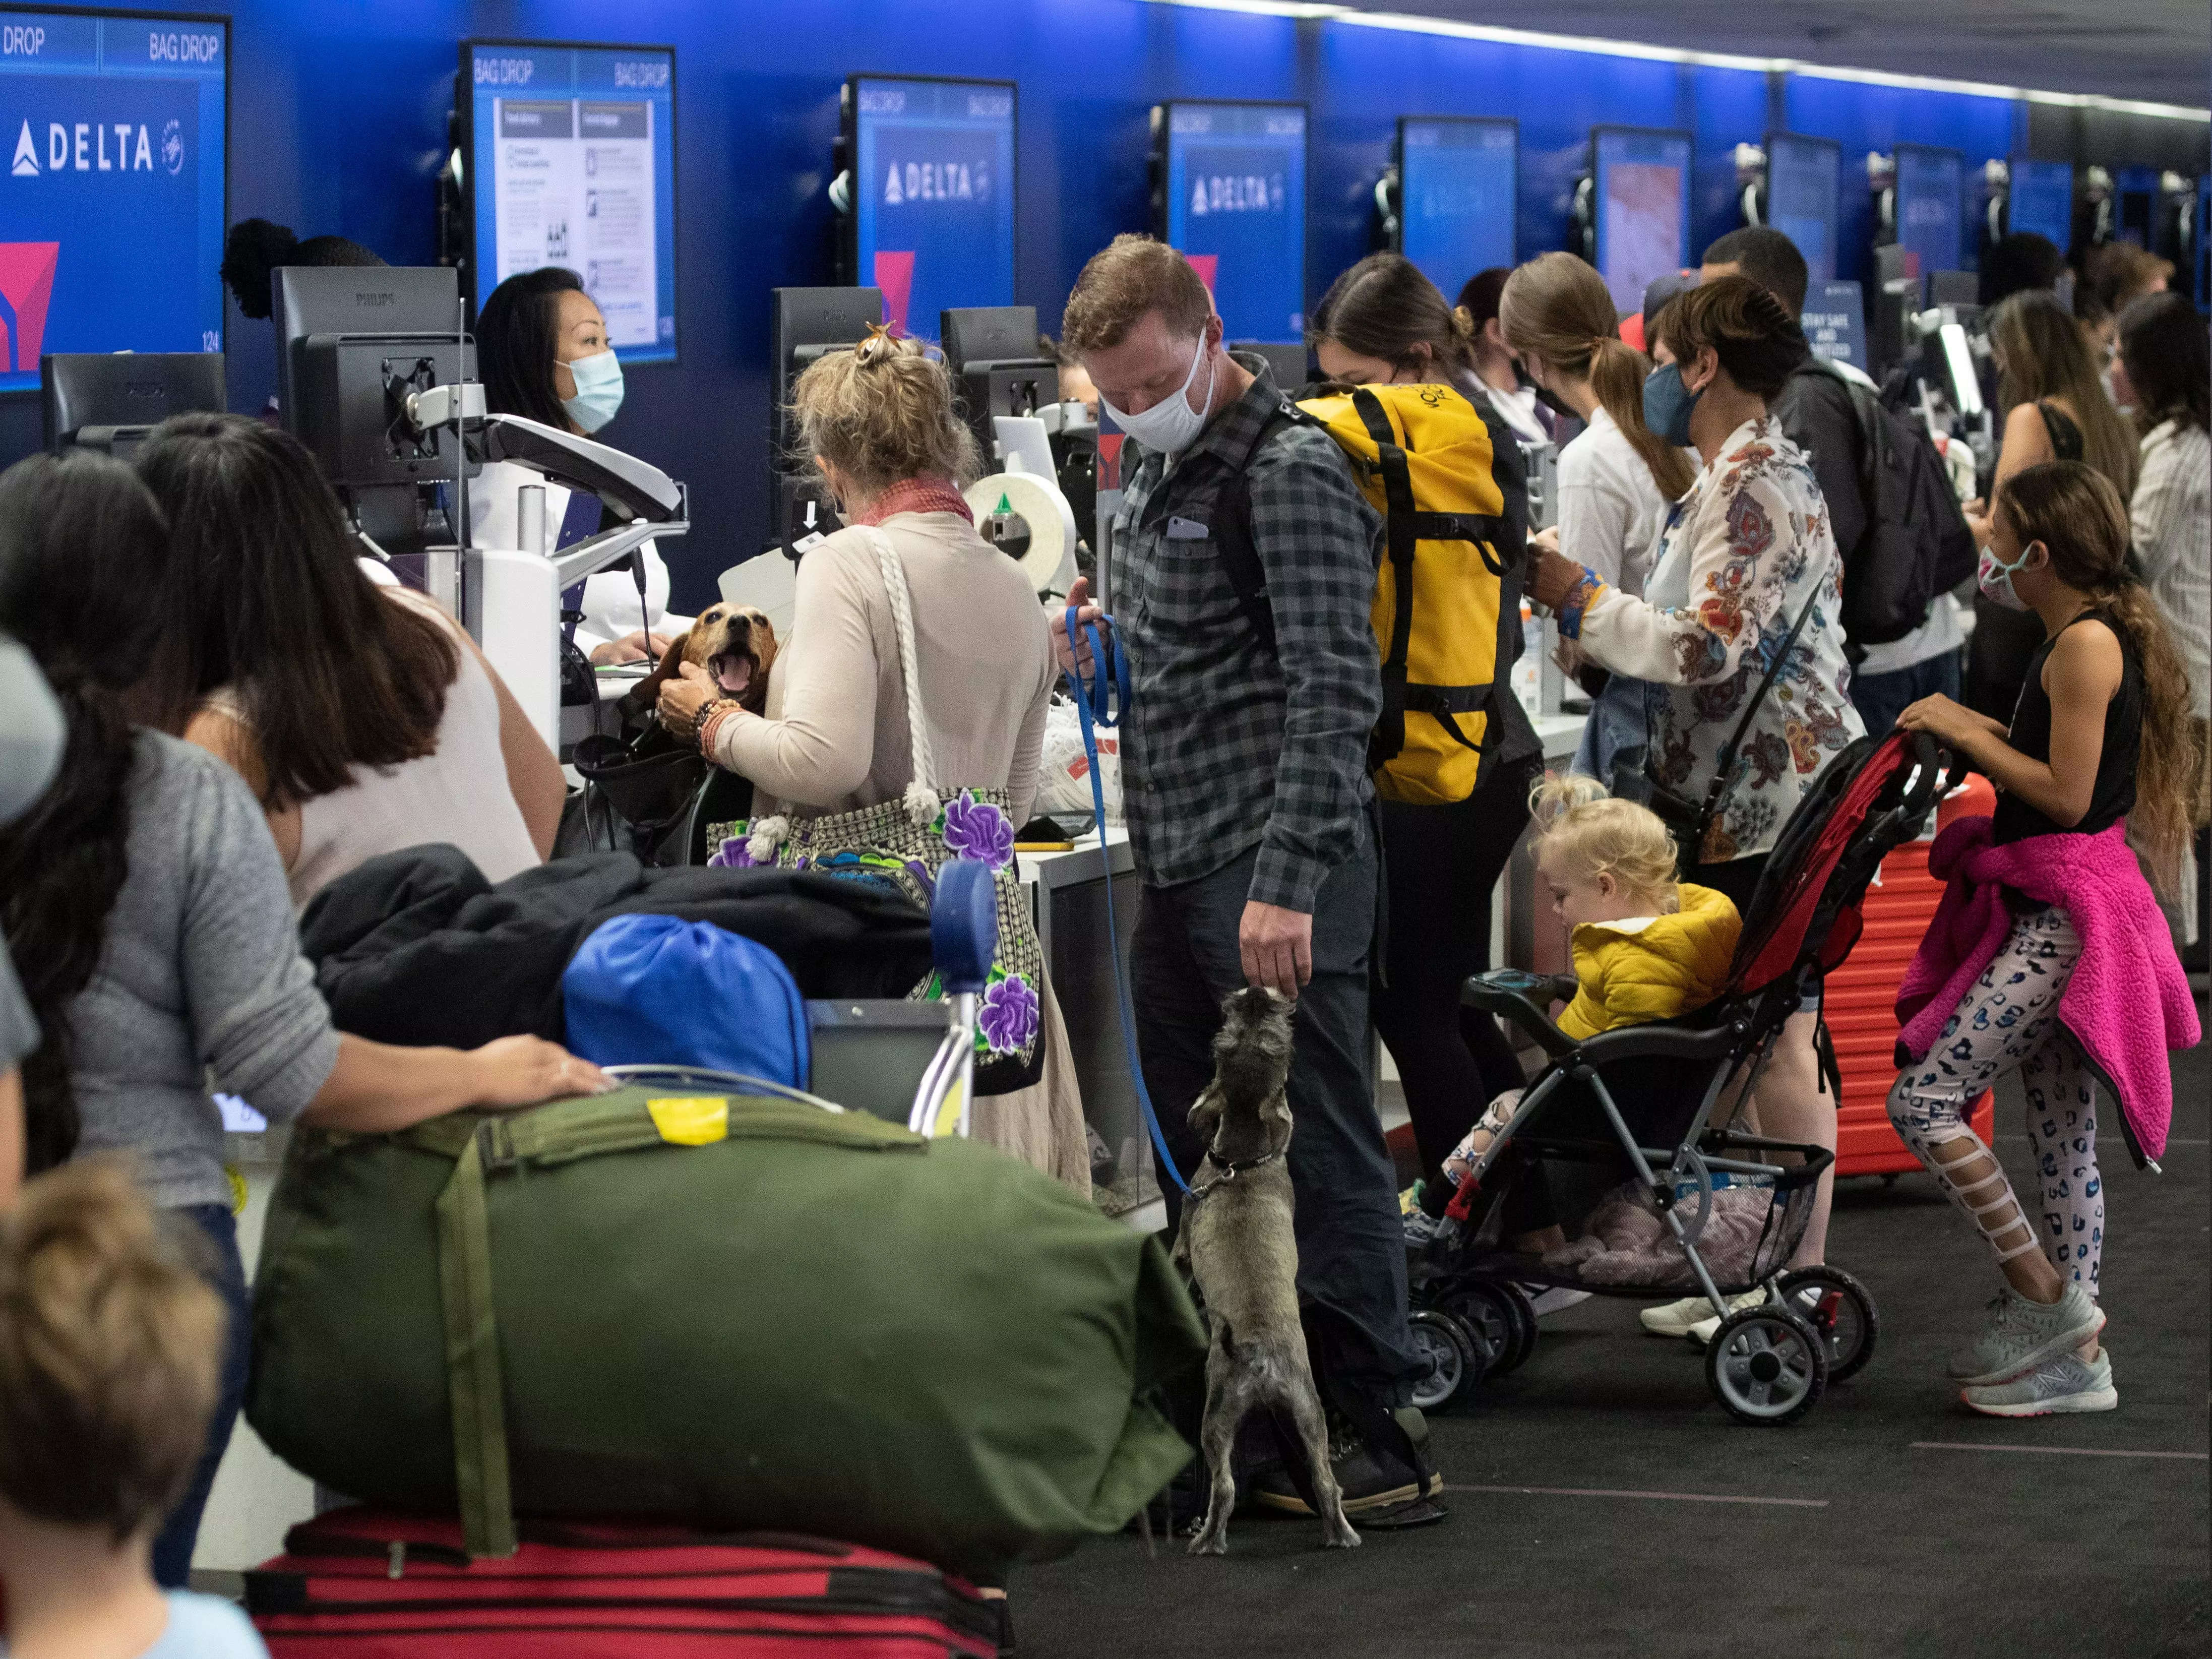 A crowd of travelers check in for their flights on Memorial Day weekend. Over 3,000 flights were delayed or cancelled over the holiday weekend.